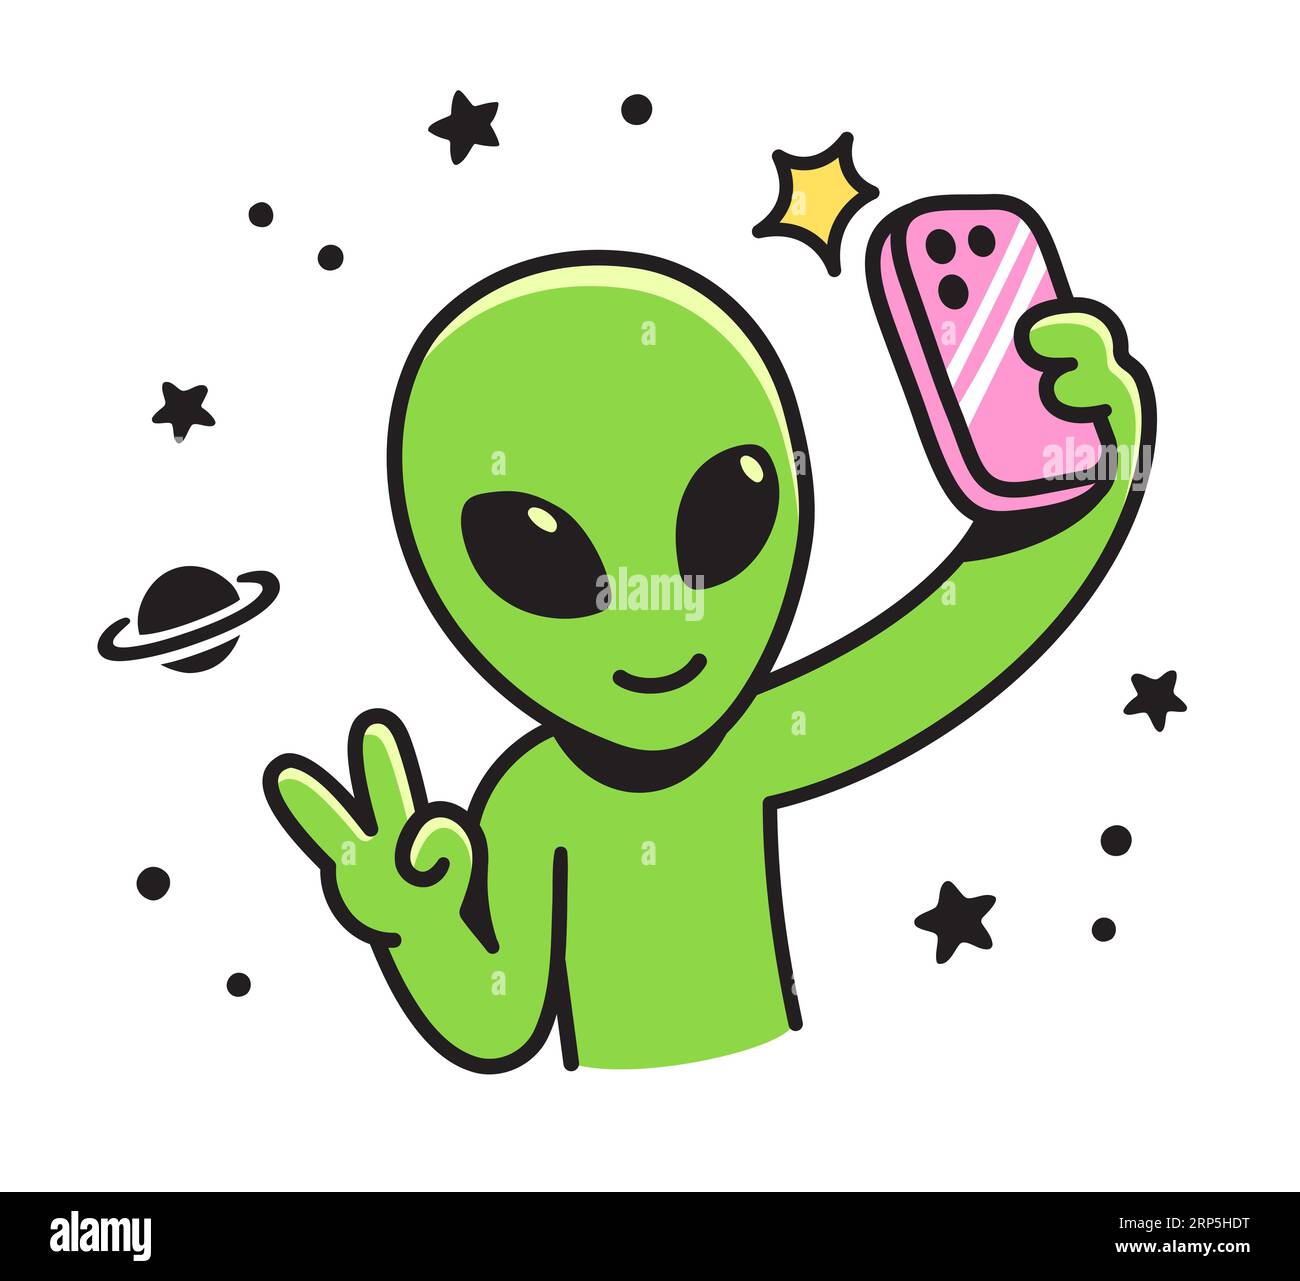 Cute cartoon alien character takes selfie with phone. Funny vector illustration. Stock Vector